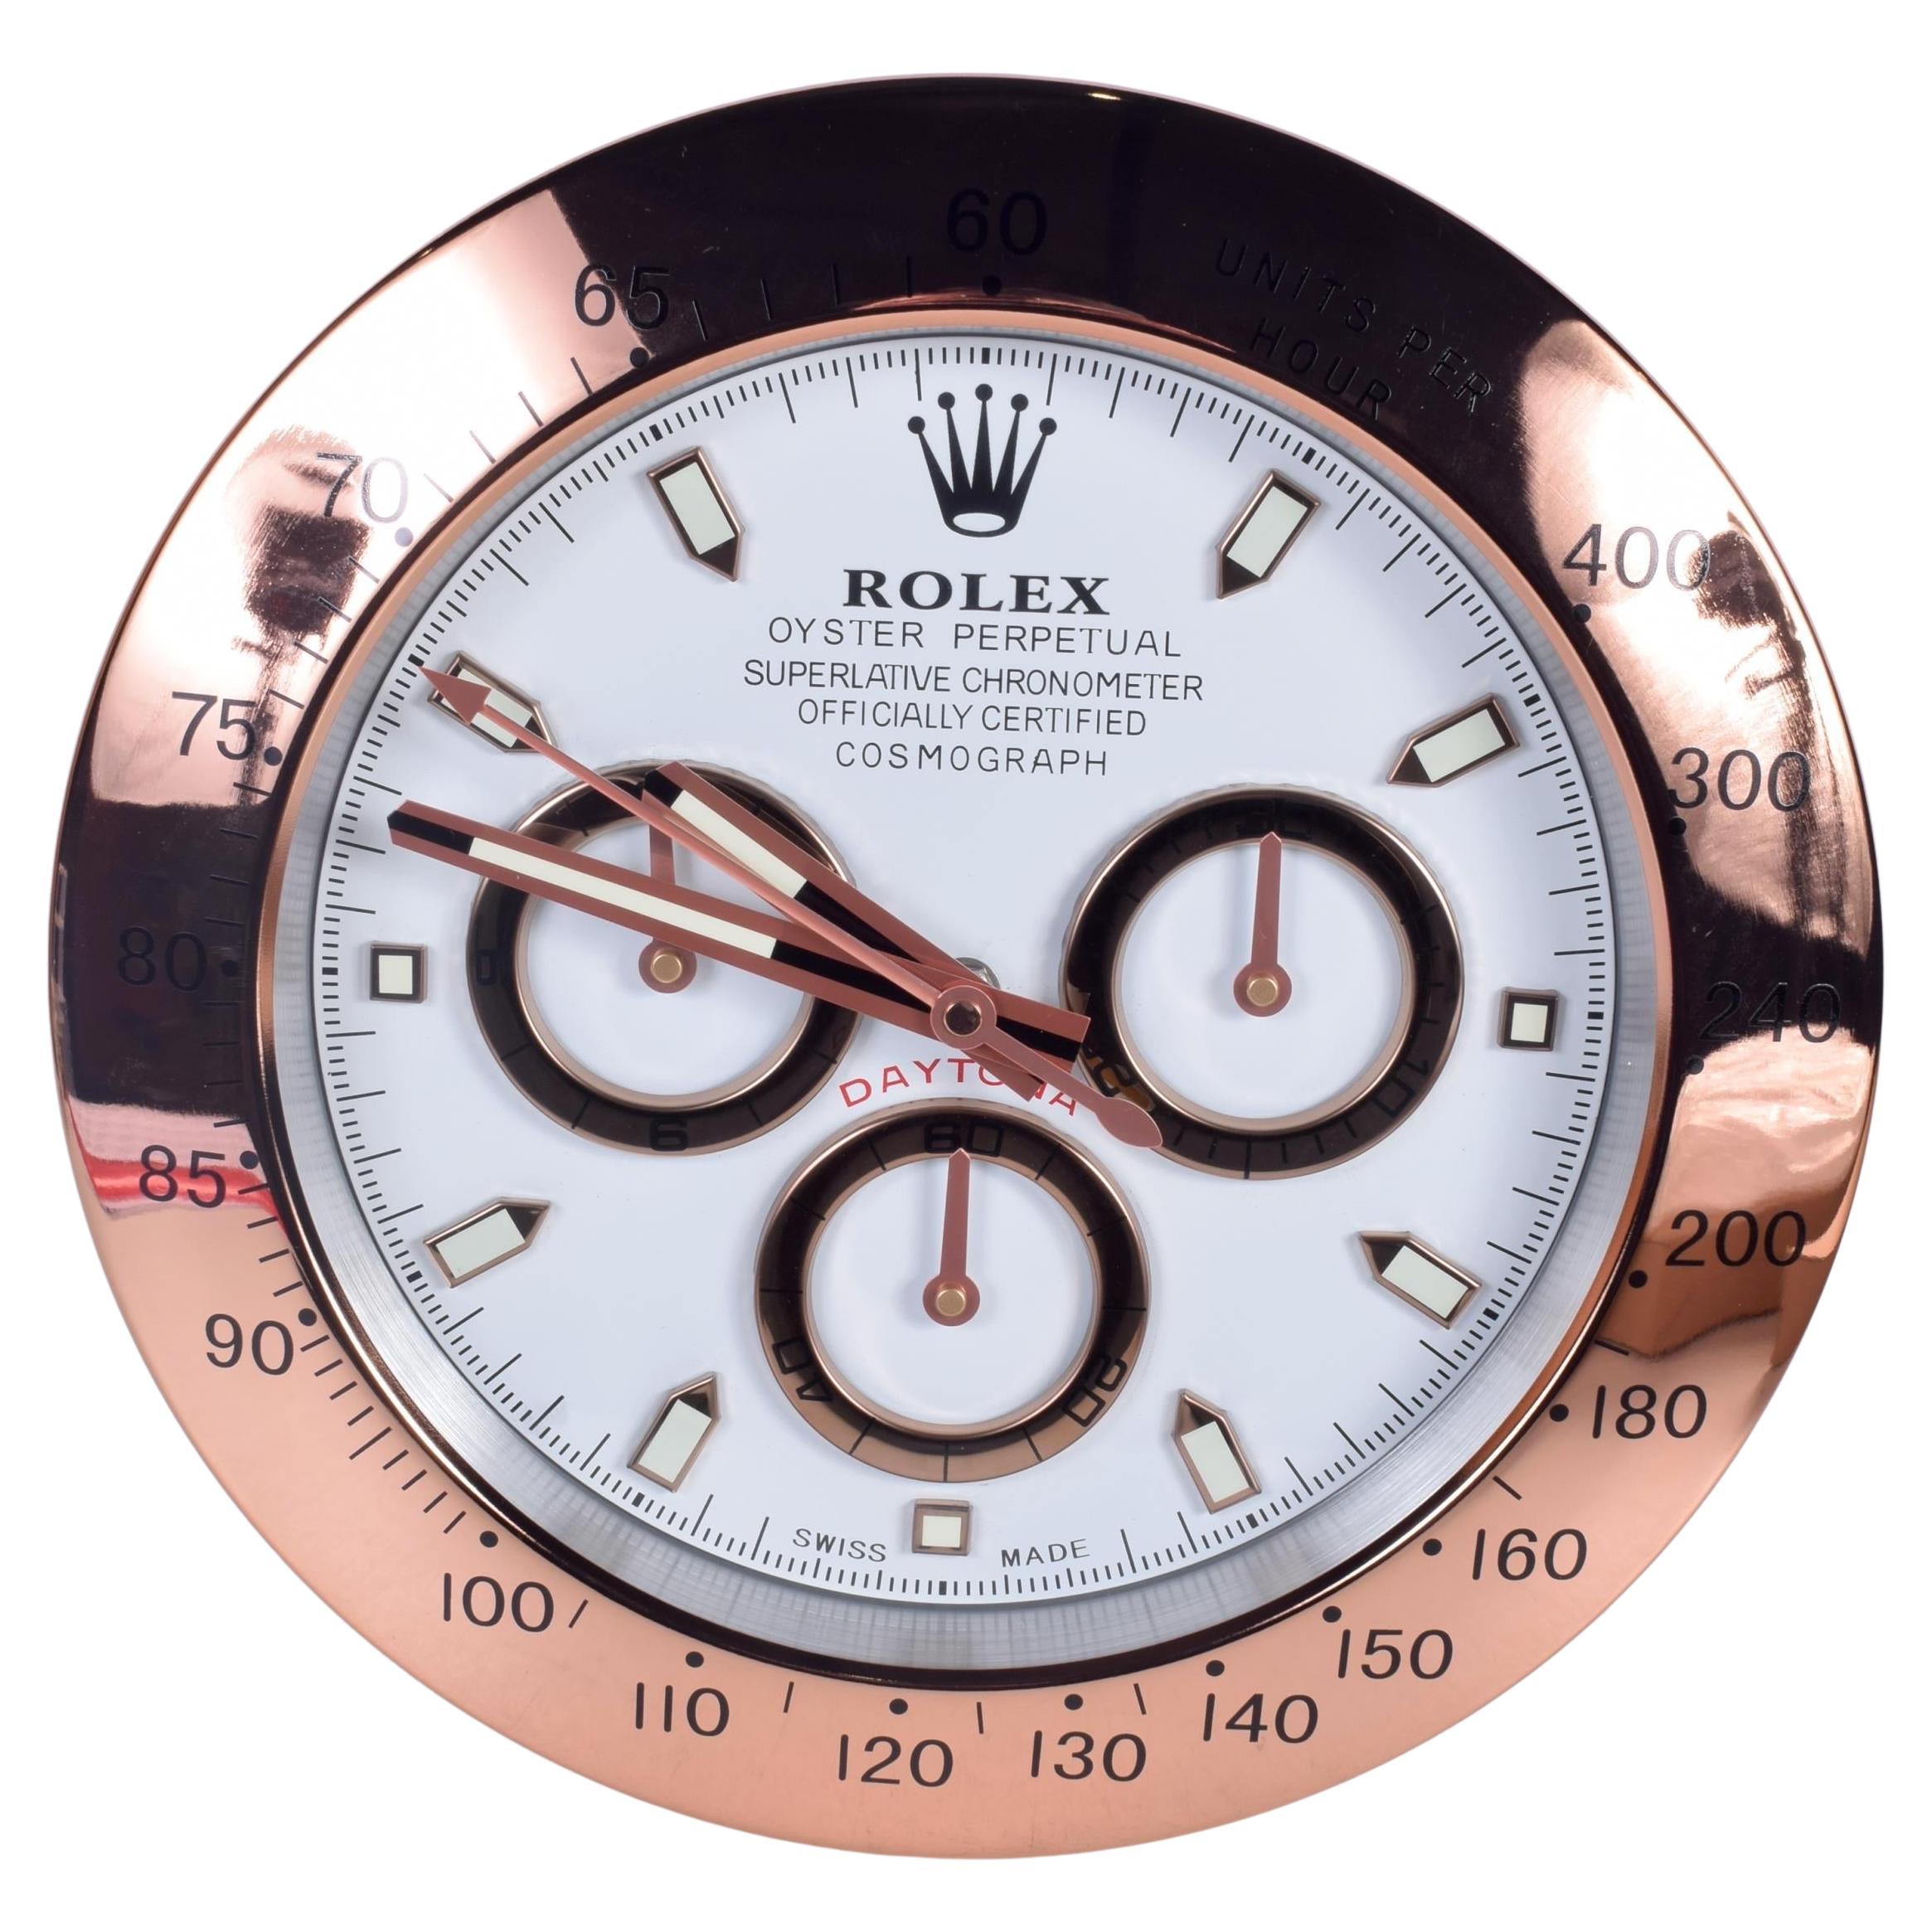 ROLEX Officially Certified Oyster Perpetual Cosmograph Daytona Wall Clock  For Sale